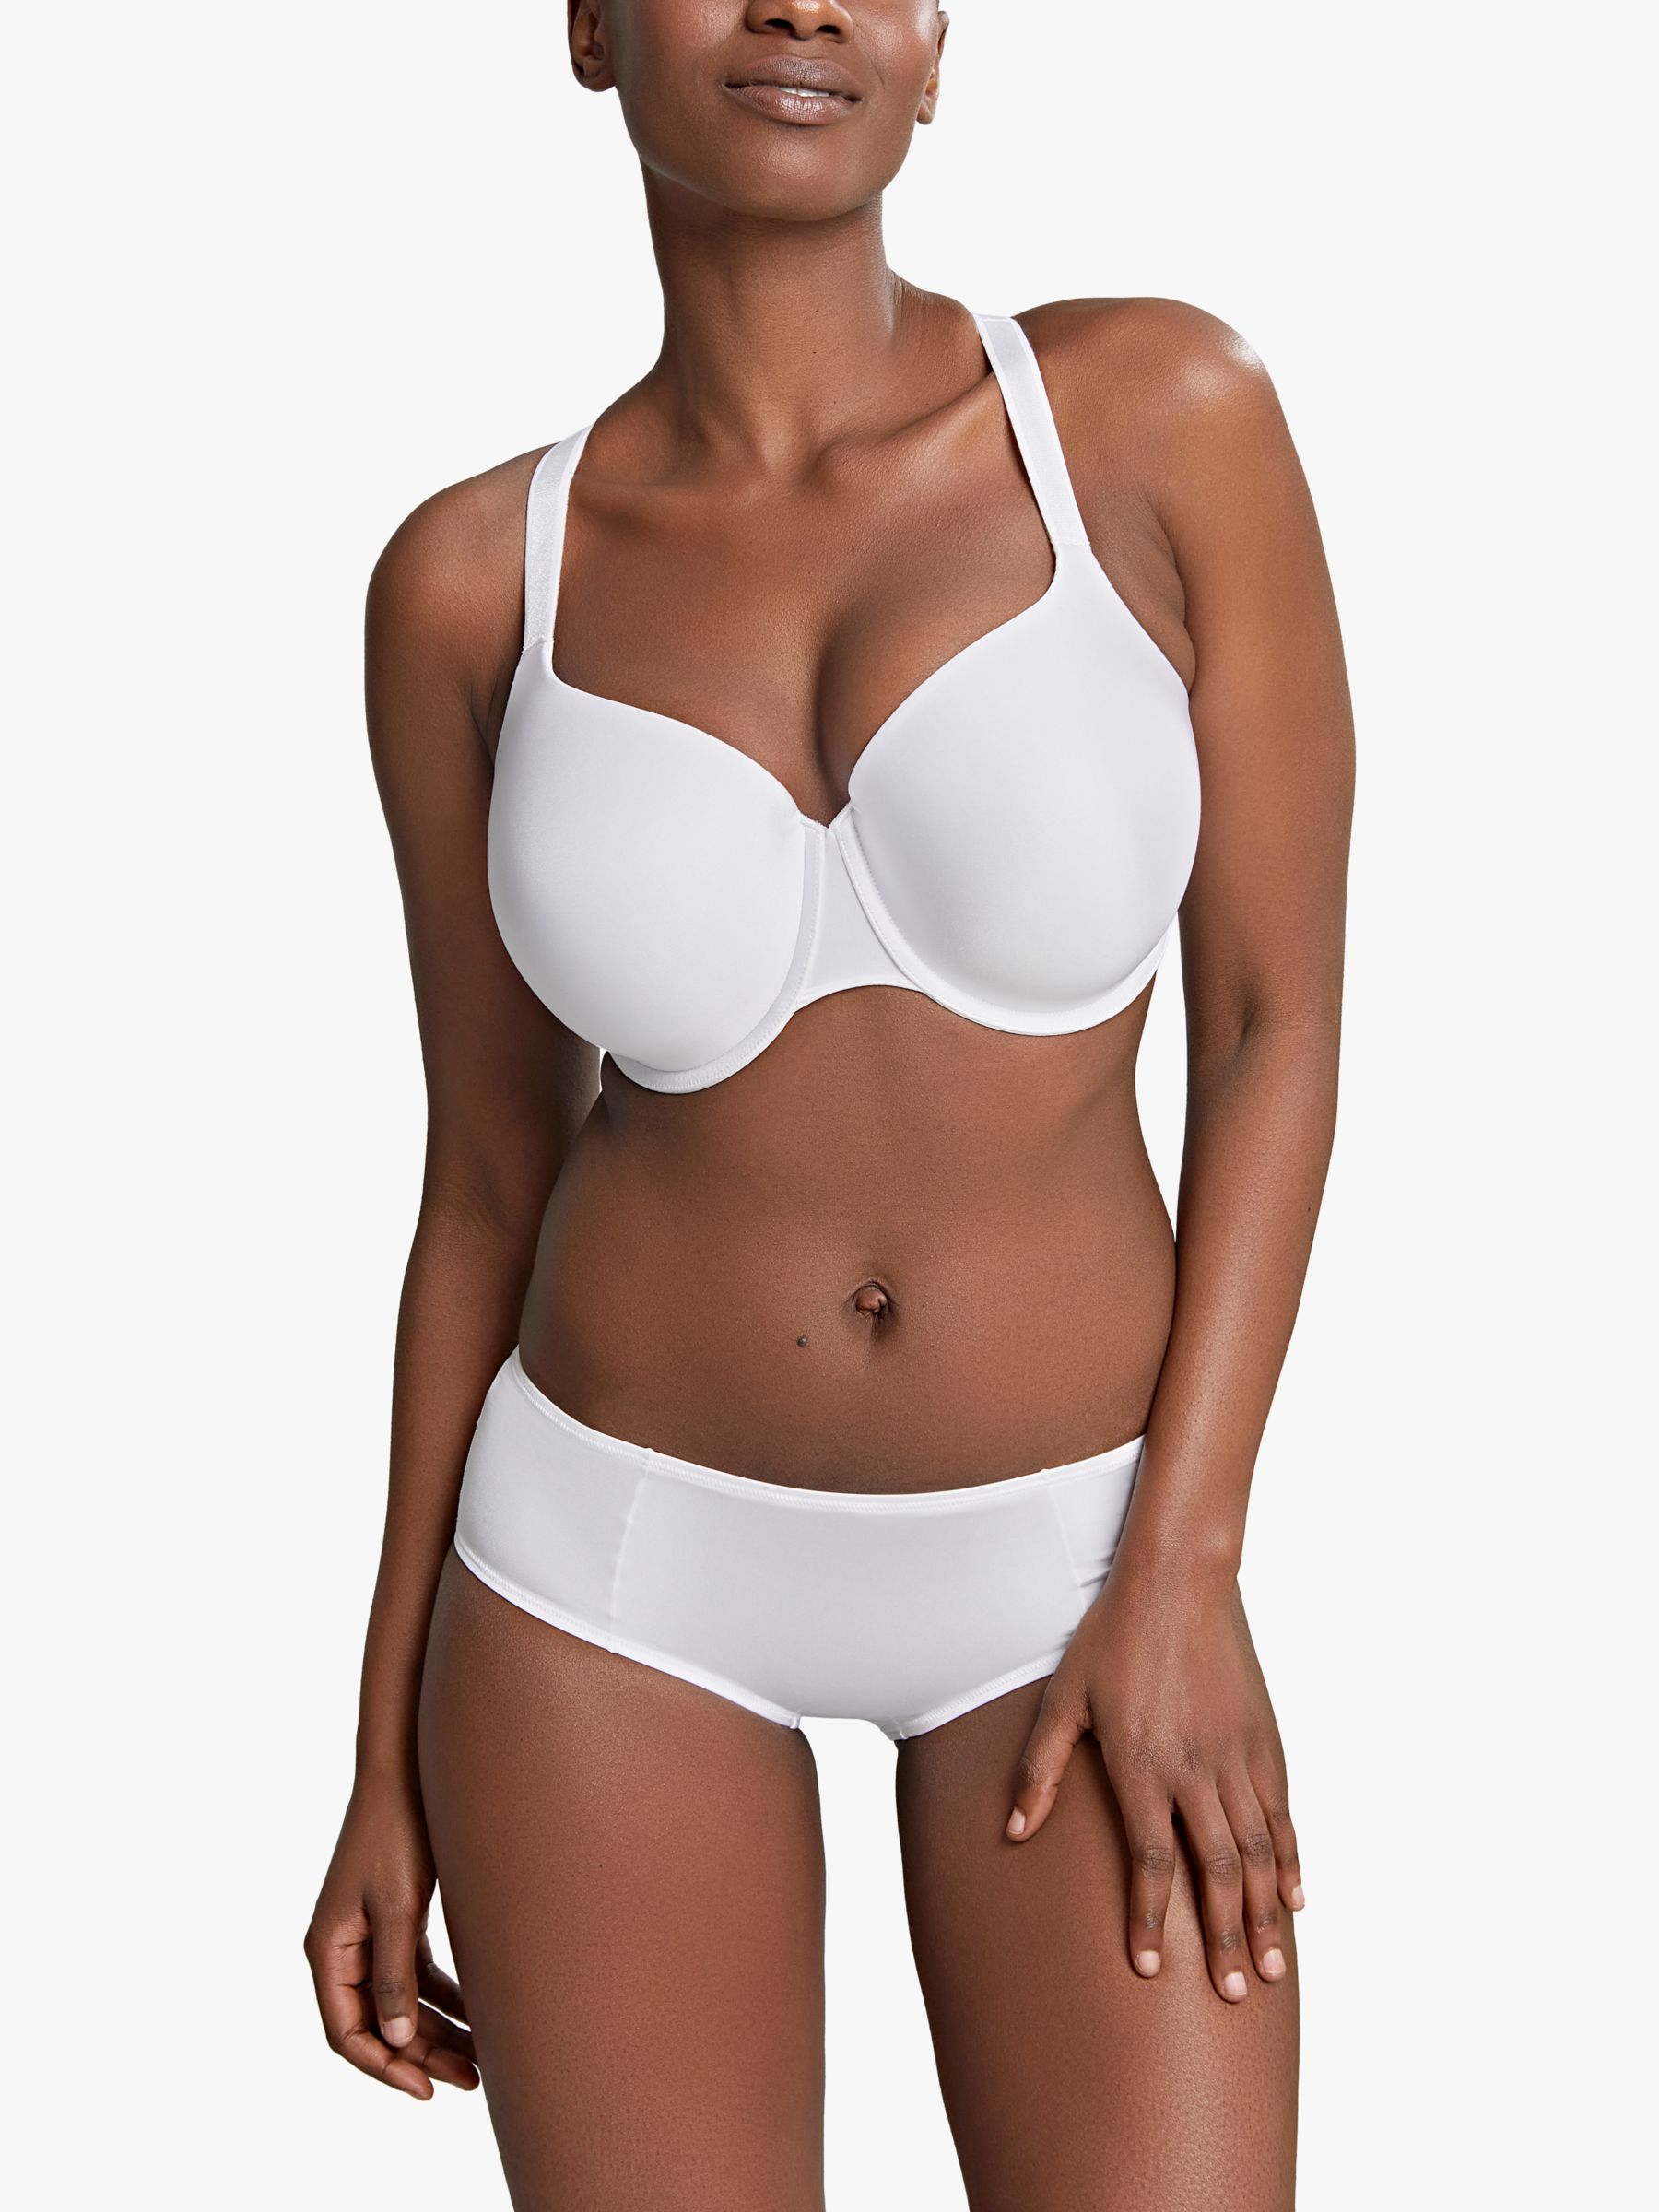 Panache Lingerie - We love Asher for its round shape and